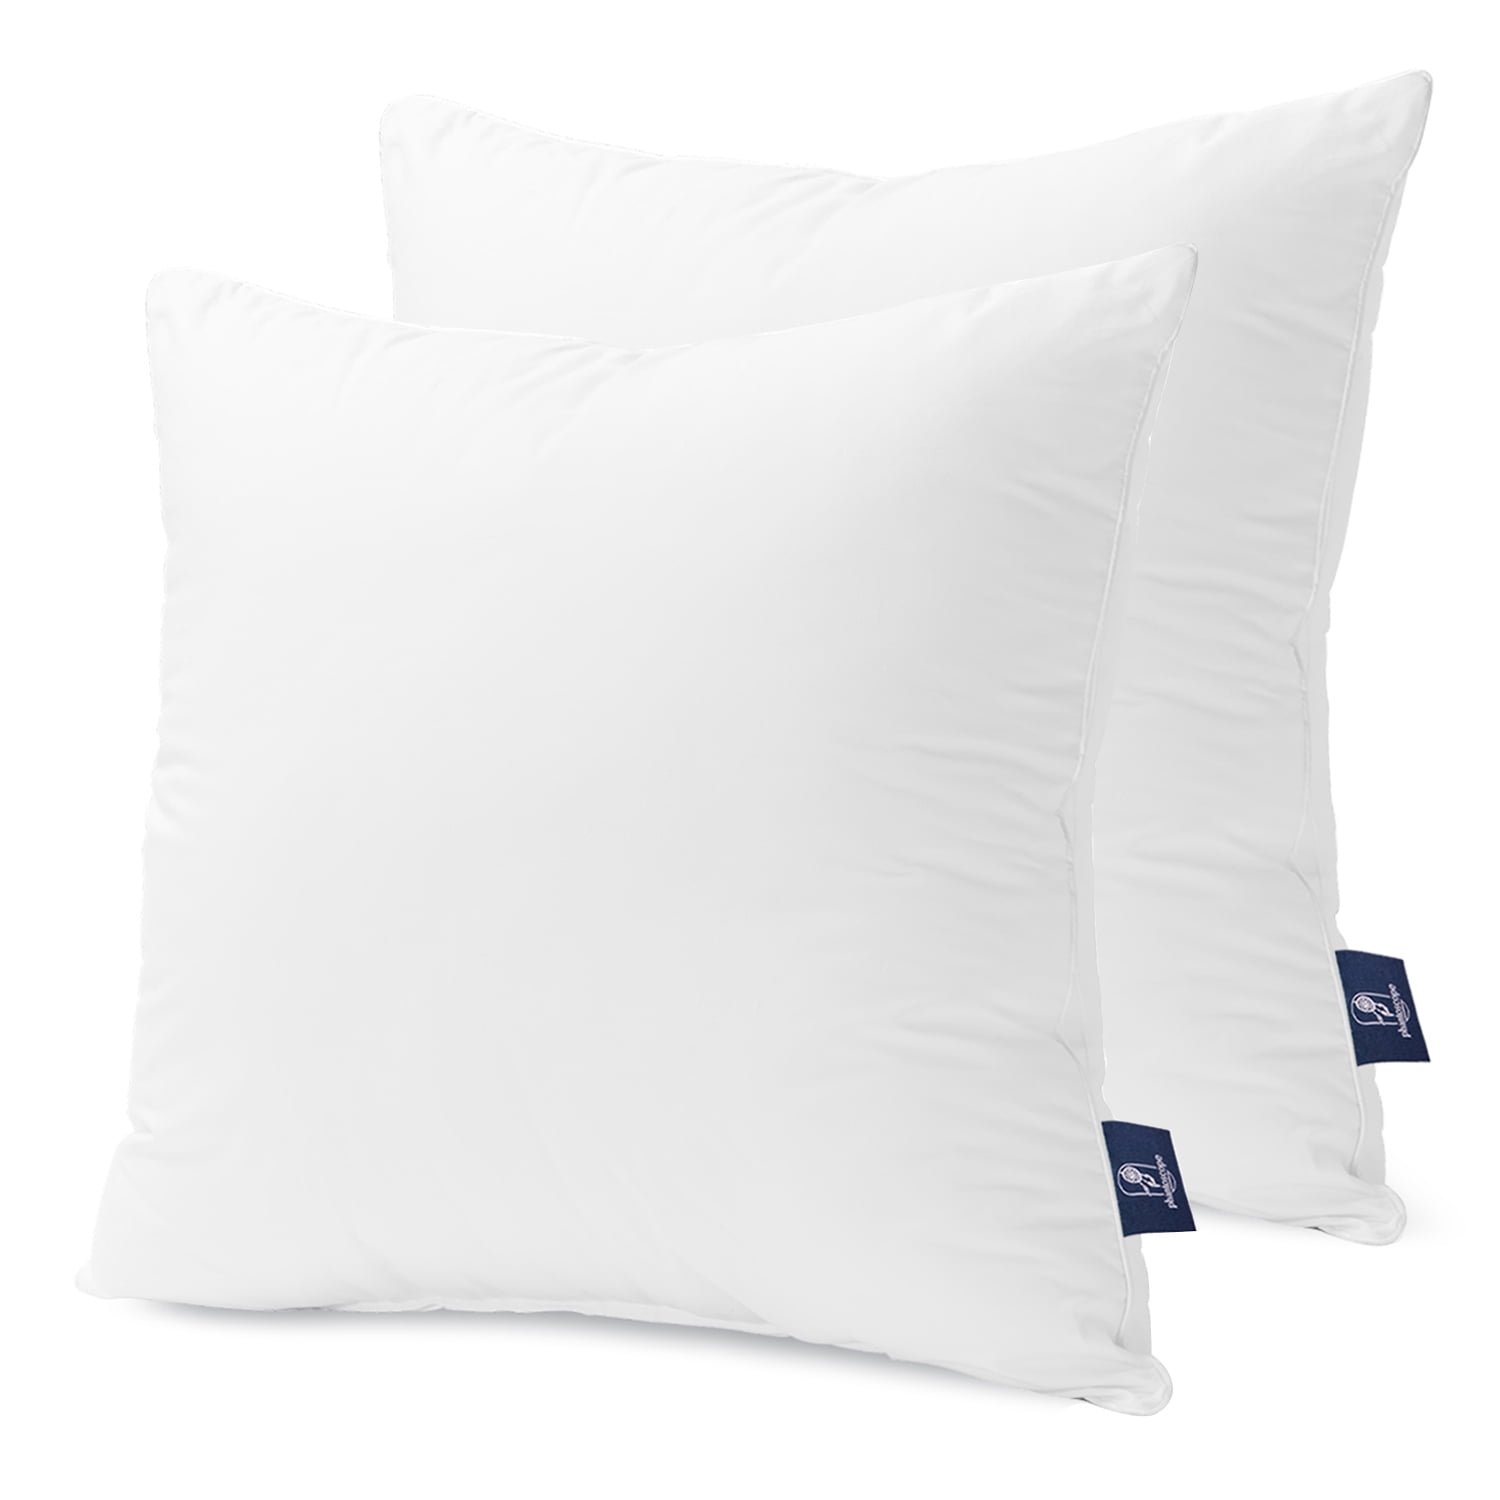 Basic Home 14x14 Decorative Throw Pillow Inserts-Down Feather Pillow Inserts-Square-Cotton Fabric-Set of 2-White.